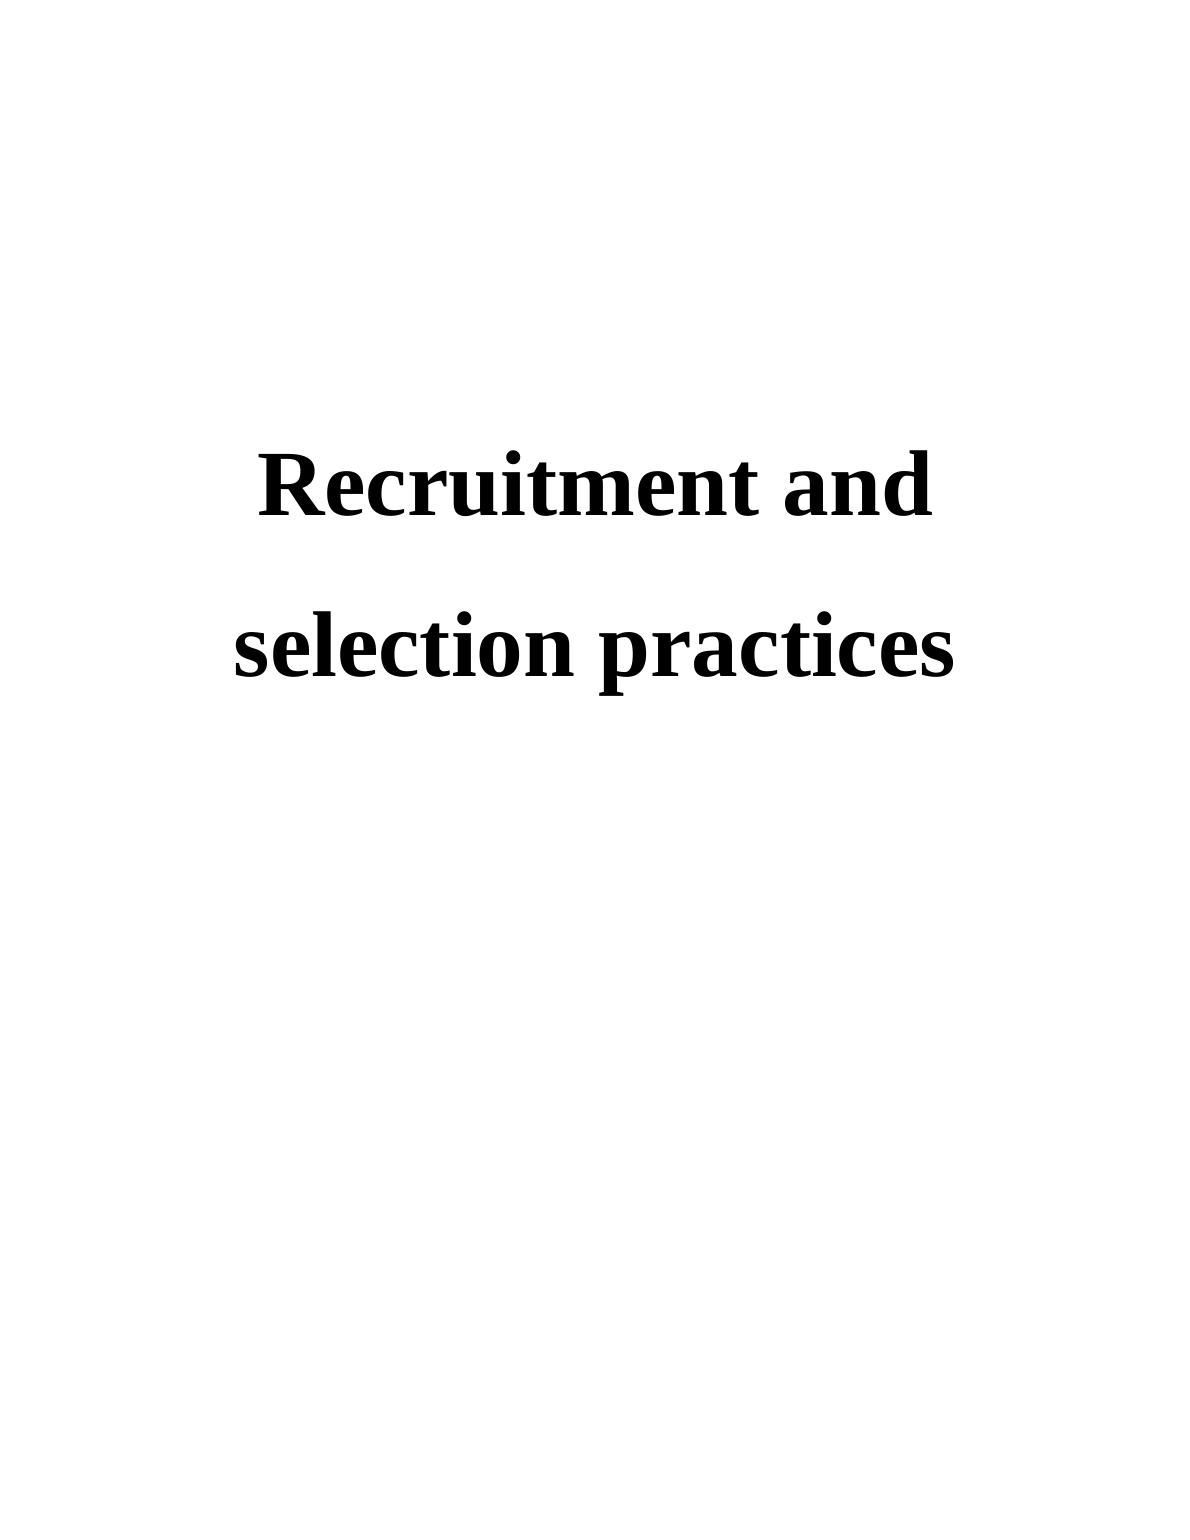 Recruitment and Selection Practices_1